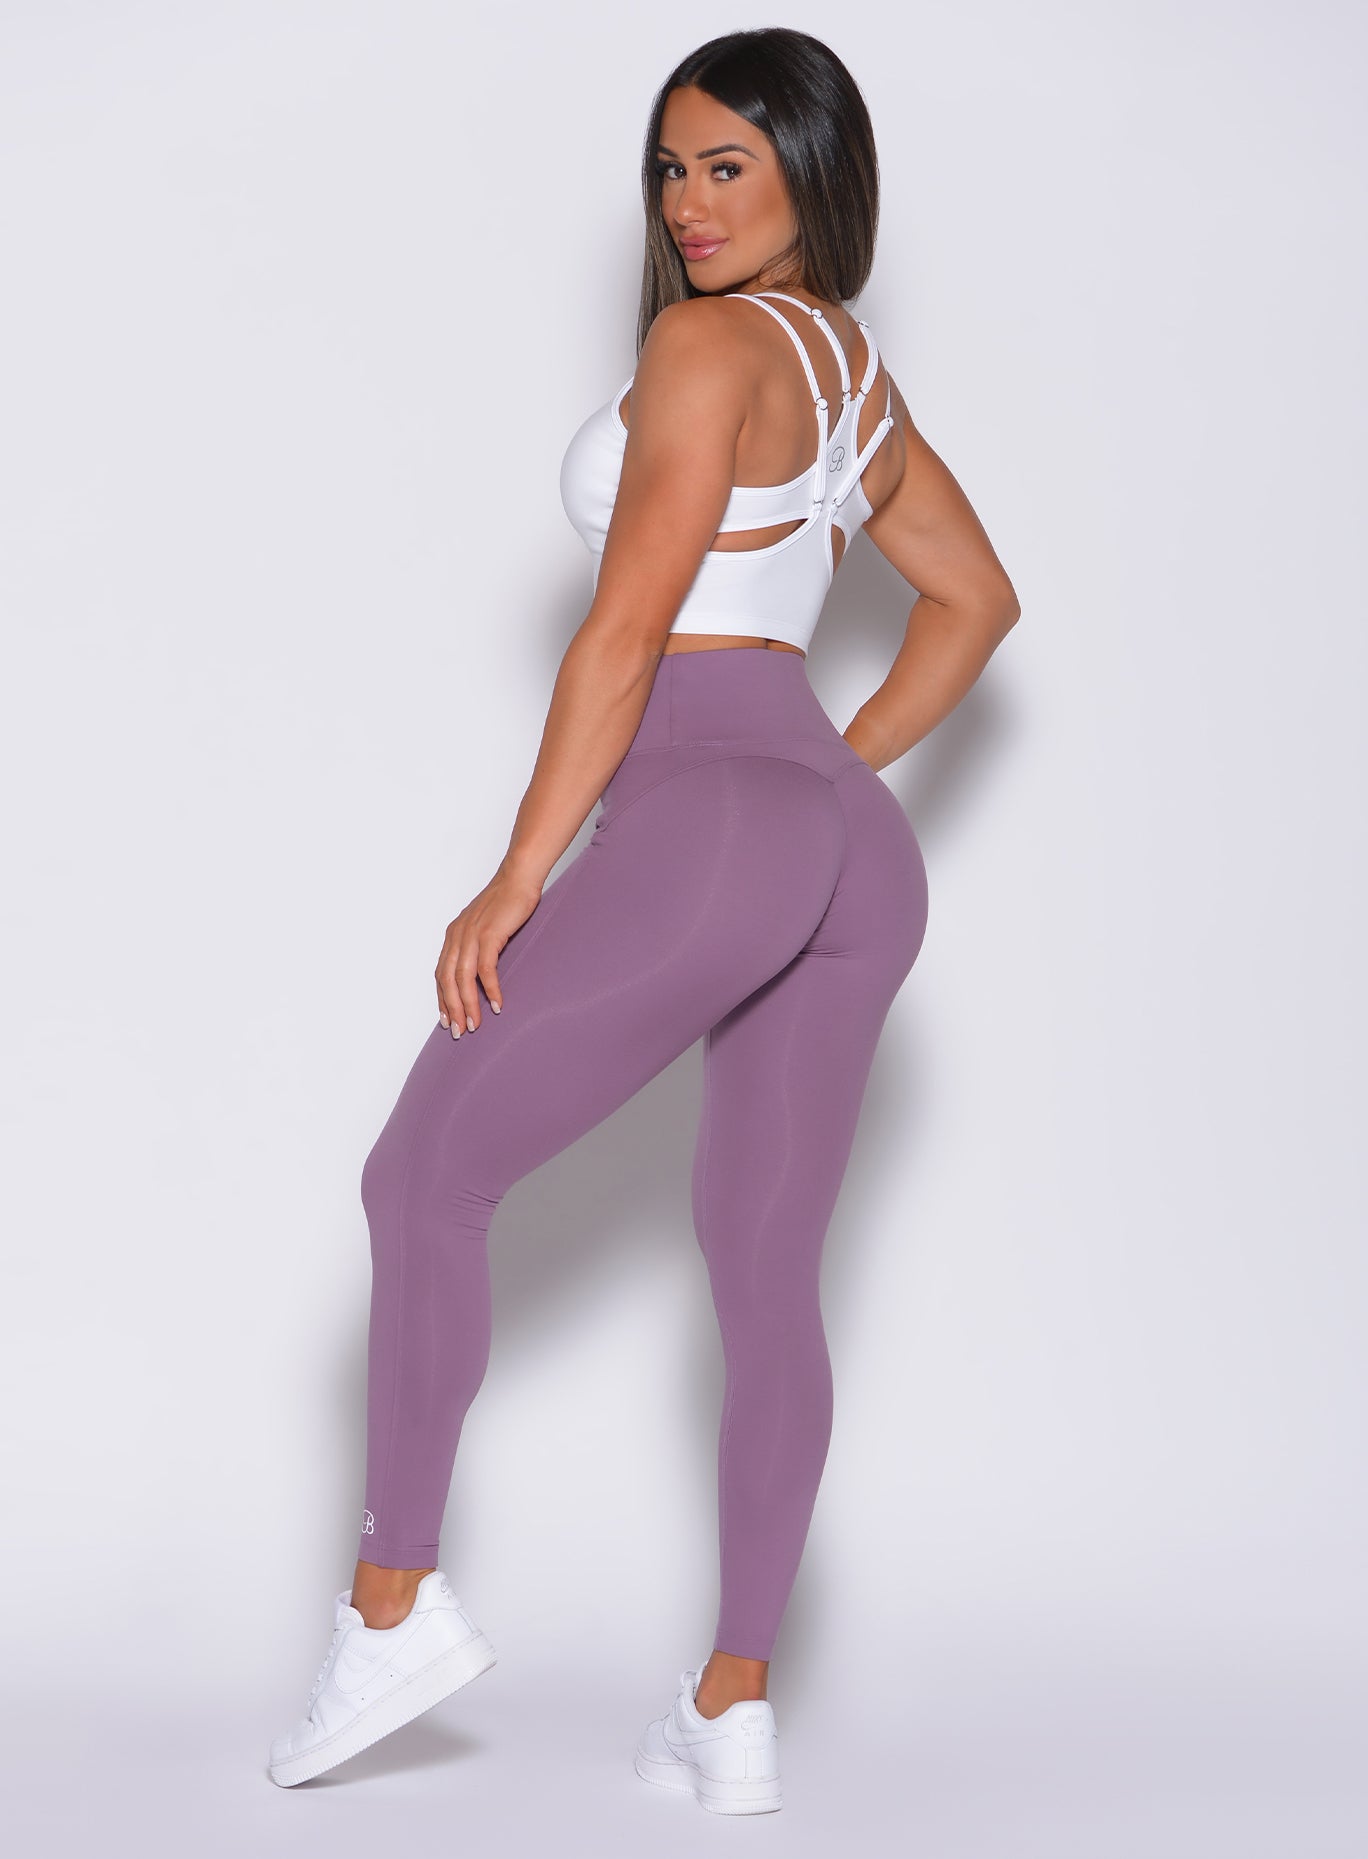 Left side profile view of a model in our snatched waist leggings in violet frost color and a white sports bra 